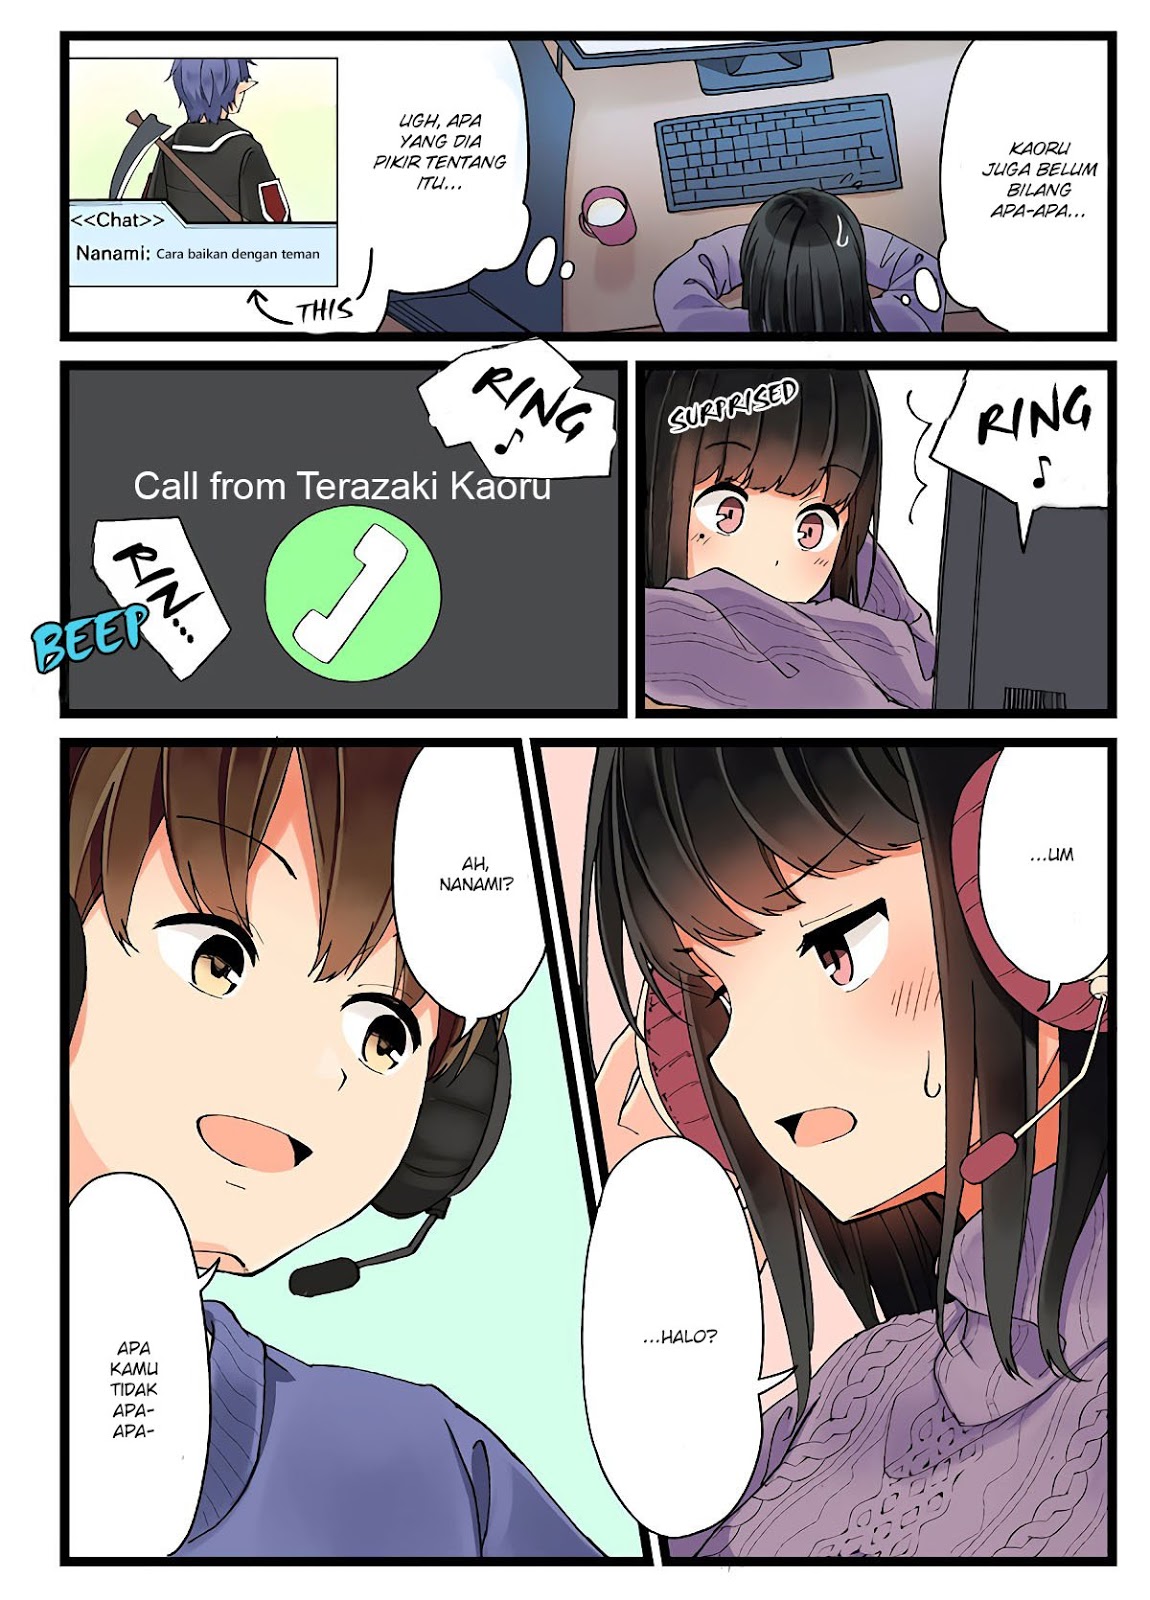 Hanging Out with a Gamer Girl Chapter 8